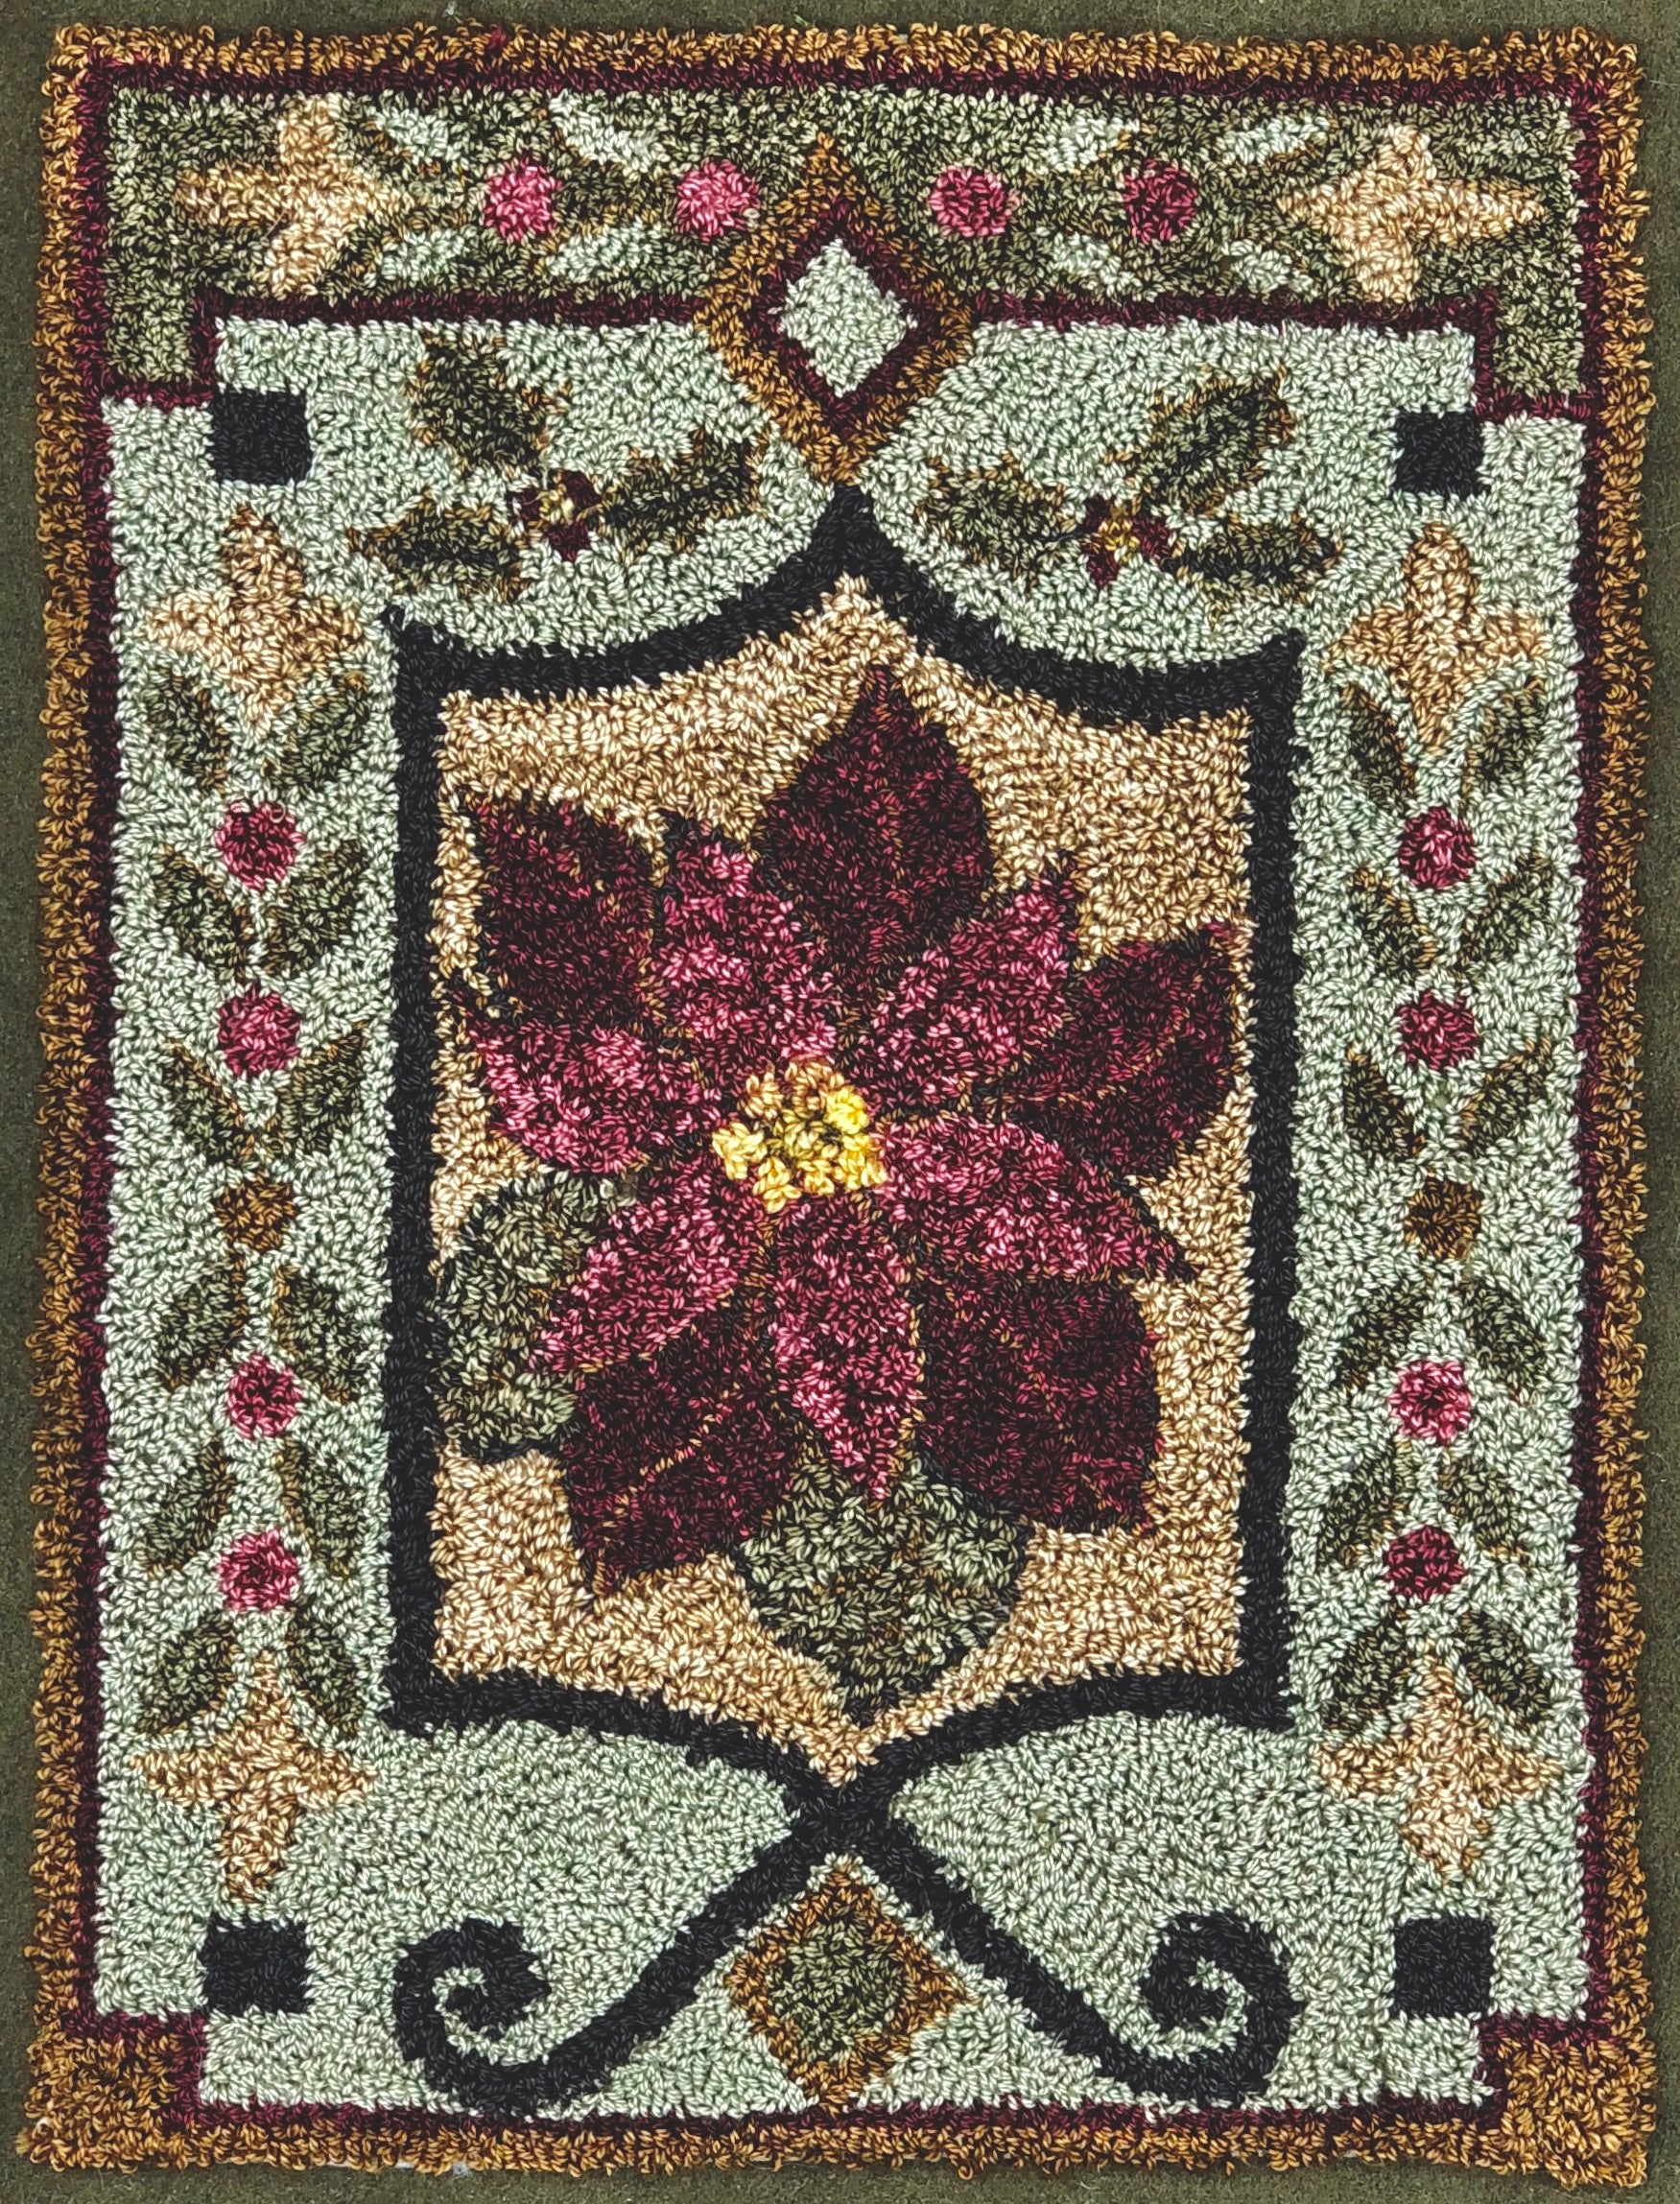 Holiday Views Punch Needle Pattern by Orphaned Wool. This design is available as a paper pattern and a pattern on weavers cloth. This is the perfect poinsettia holiday pattern. Finished using Valdani Threads but can also be completed using DMC Floss.